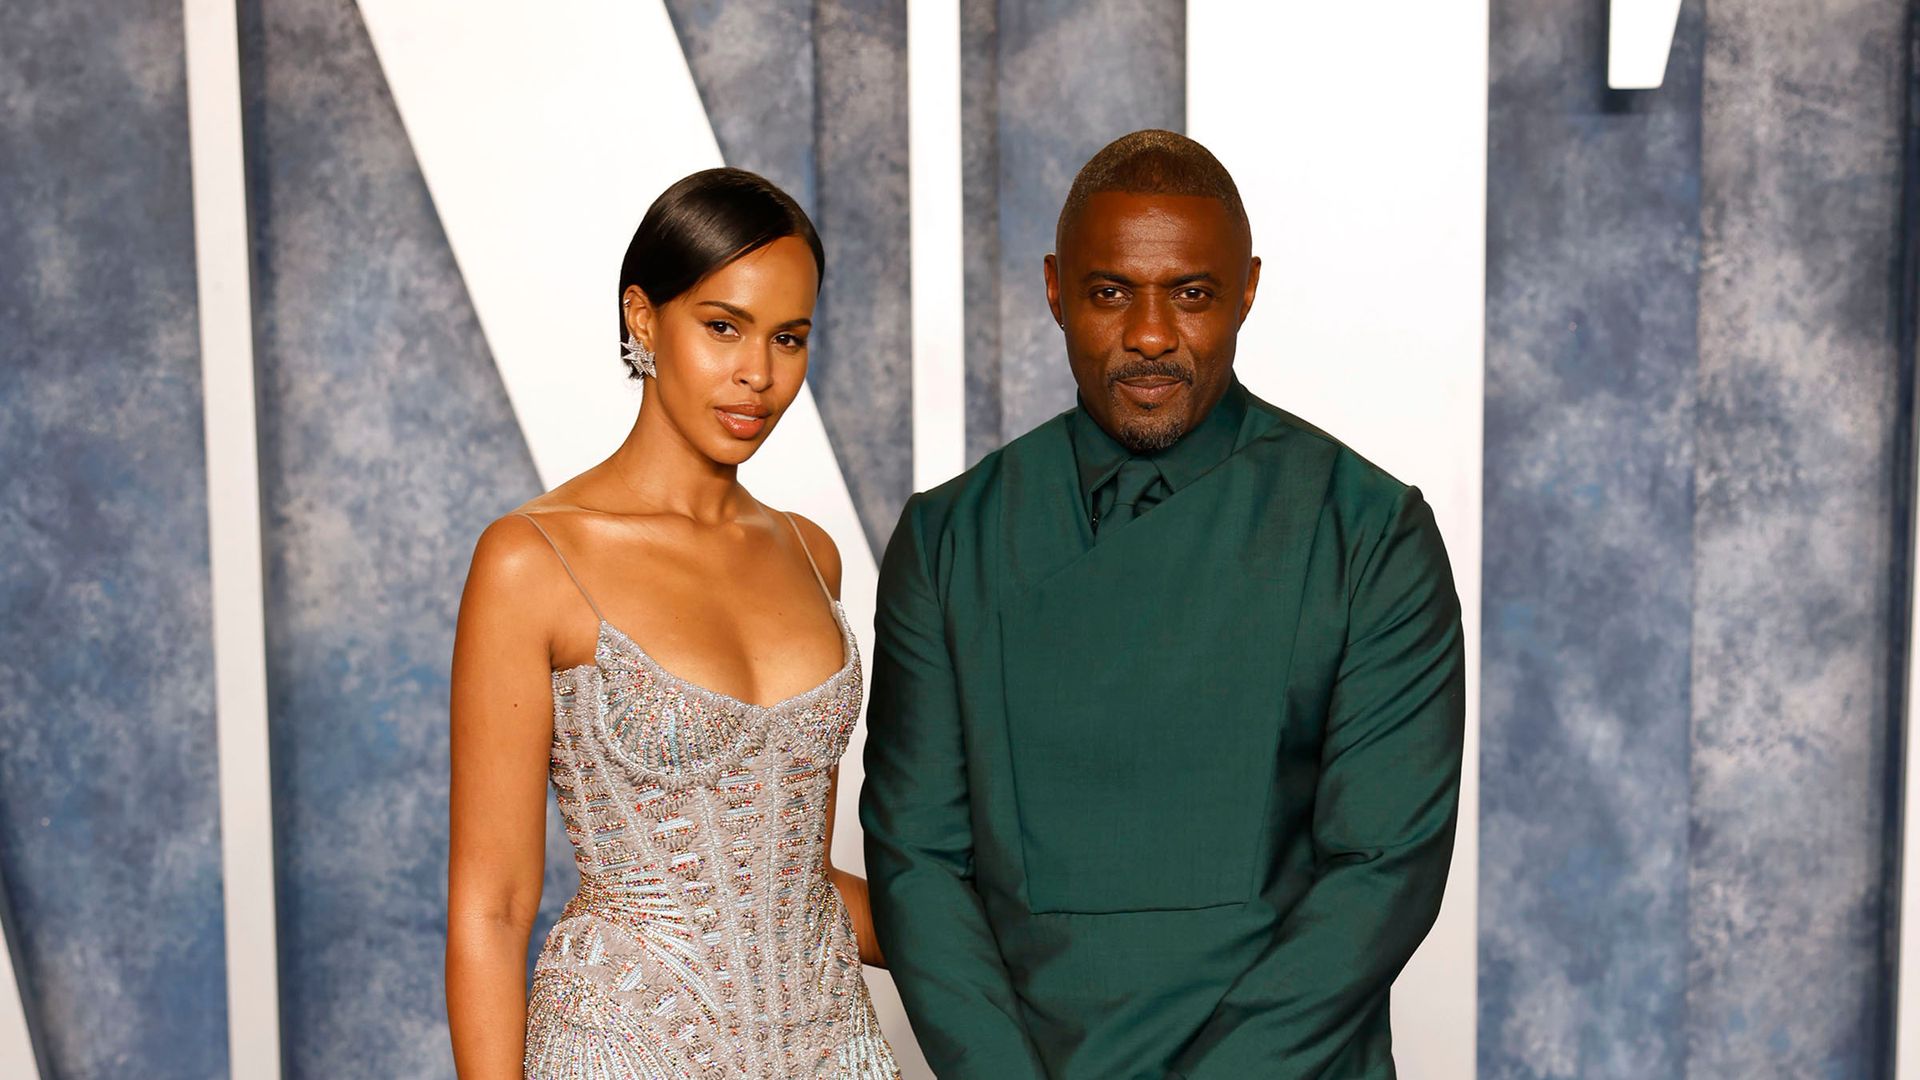 Idris Elba eclipsed by model wife Sabrina's appearance in very daring red dress